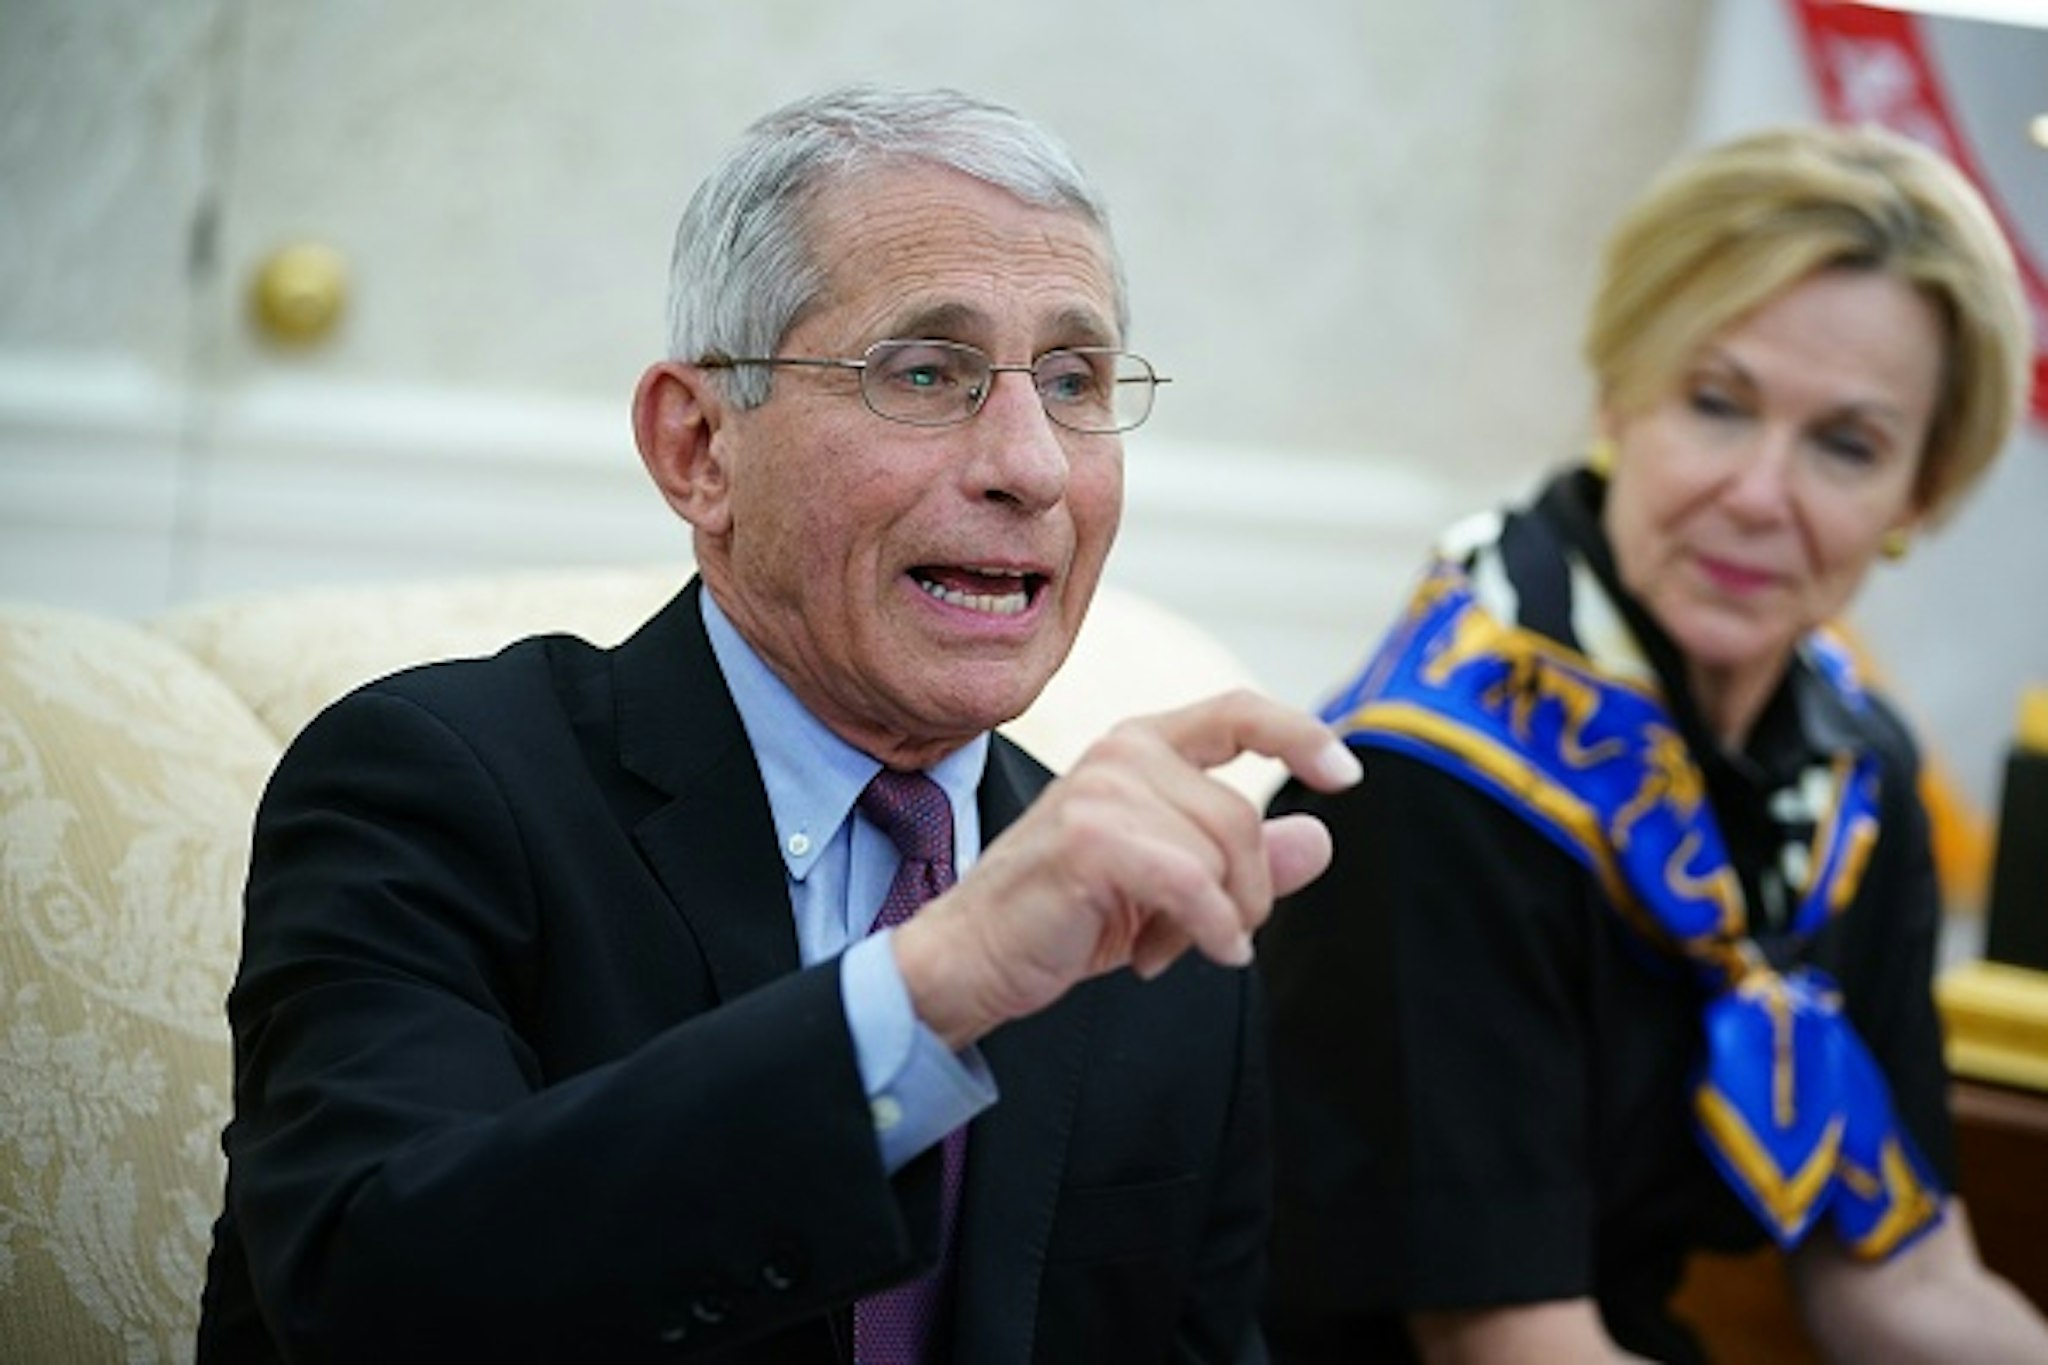 Dr. Anthony Fauci (L), director of the National Institute of Allergy and Infectious Diseases speaks next to Response coordinator for White House Coronavirus Task Force Deborah Birx, during a meeting with US President Donald Trump and Louisiana Governor John Bel Edwards D-LA in the Oval Office of the White House in Washington, DC on April 29, 2020.